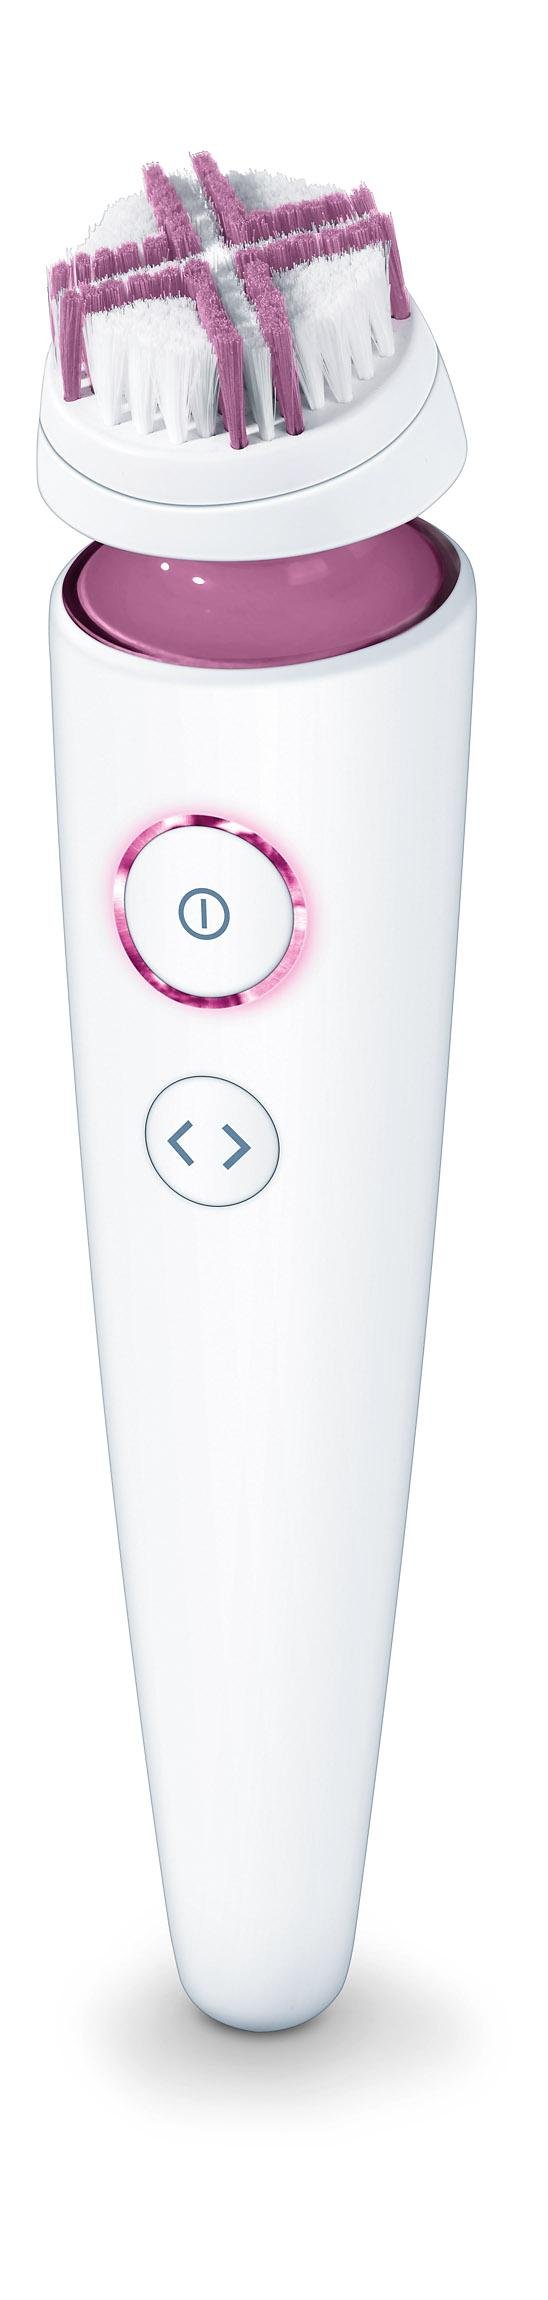 Beurer Facial Cleansing Brush -FC 95- With 4 Brush Accessories